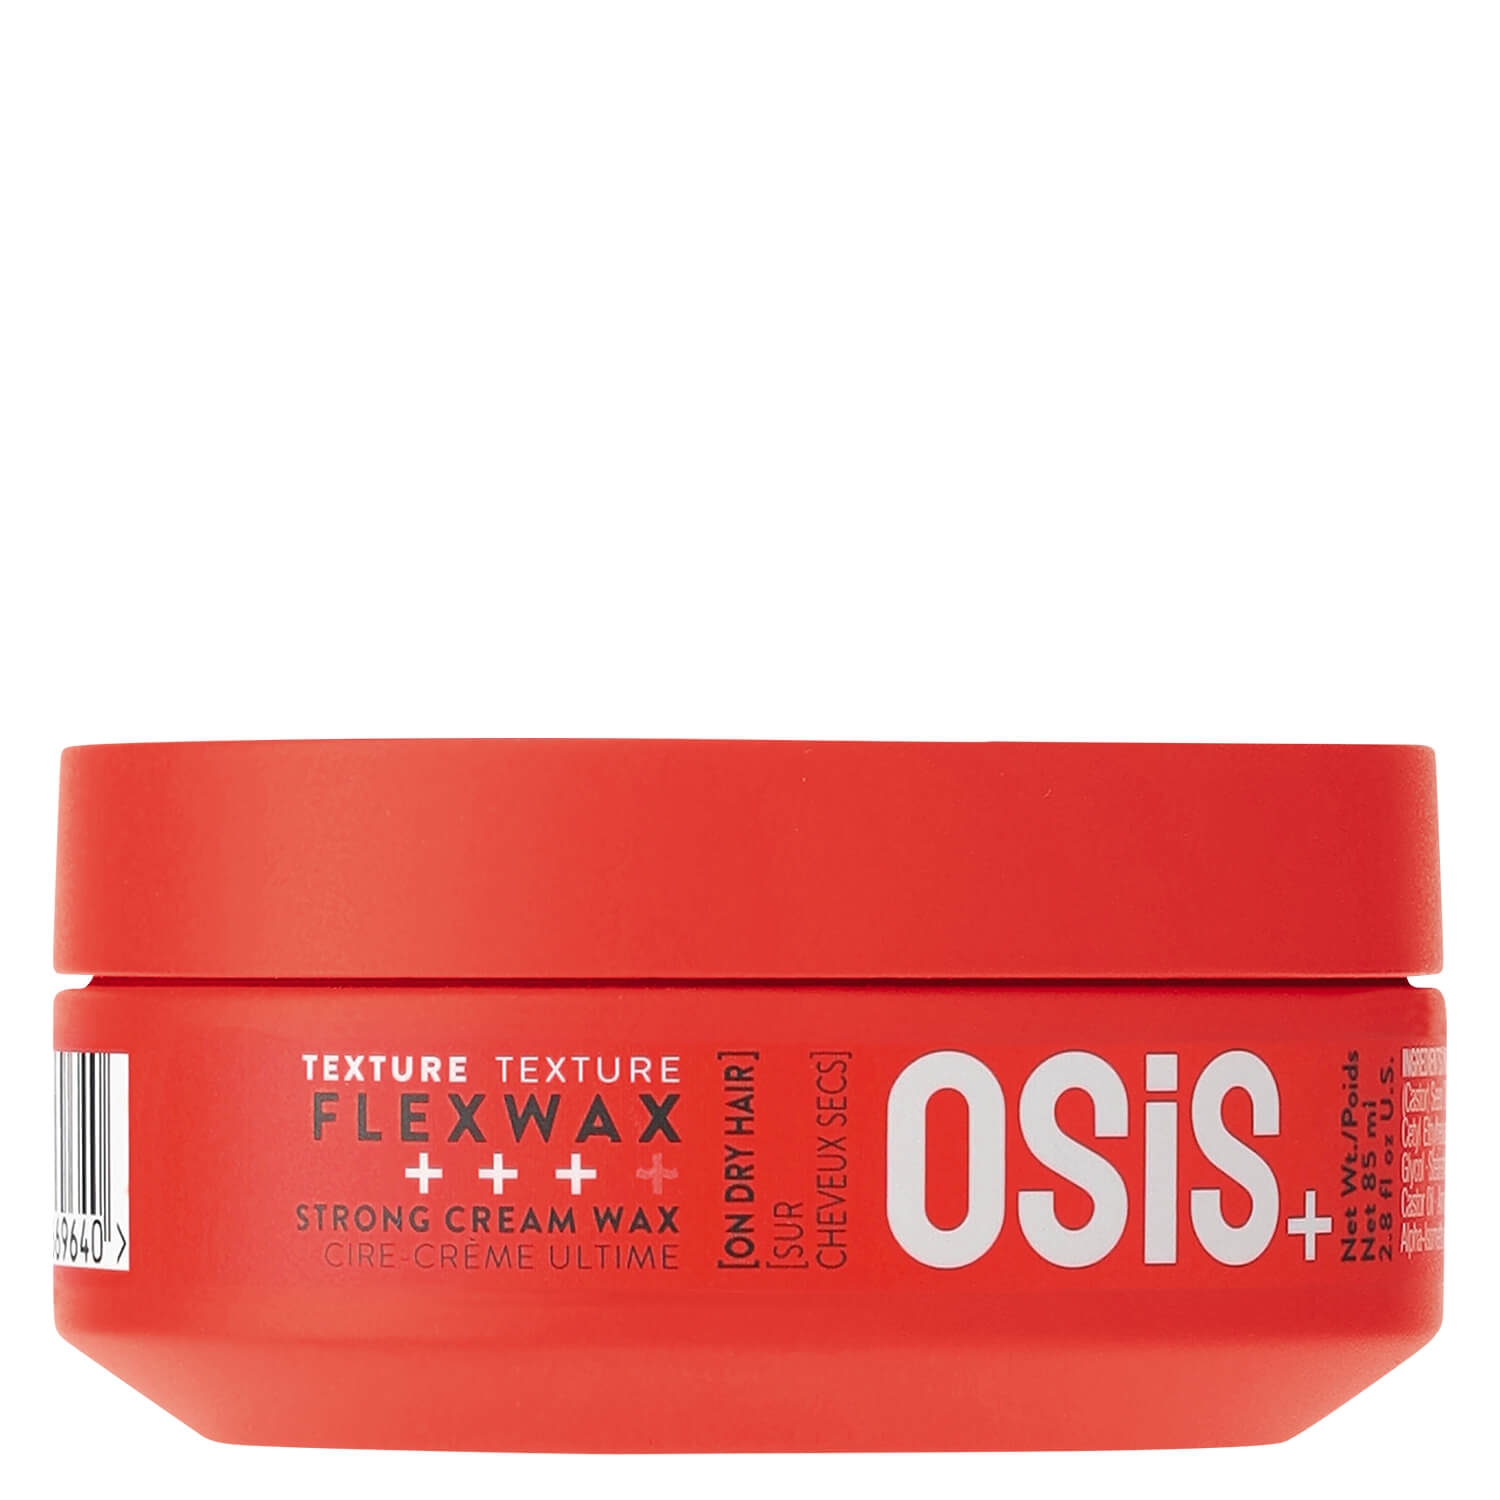 Product image from Osis - Flexwax Strong Cream Wax